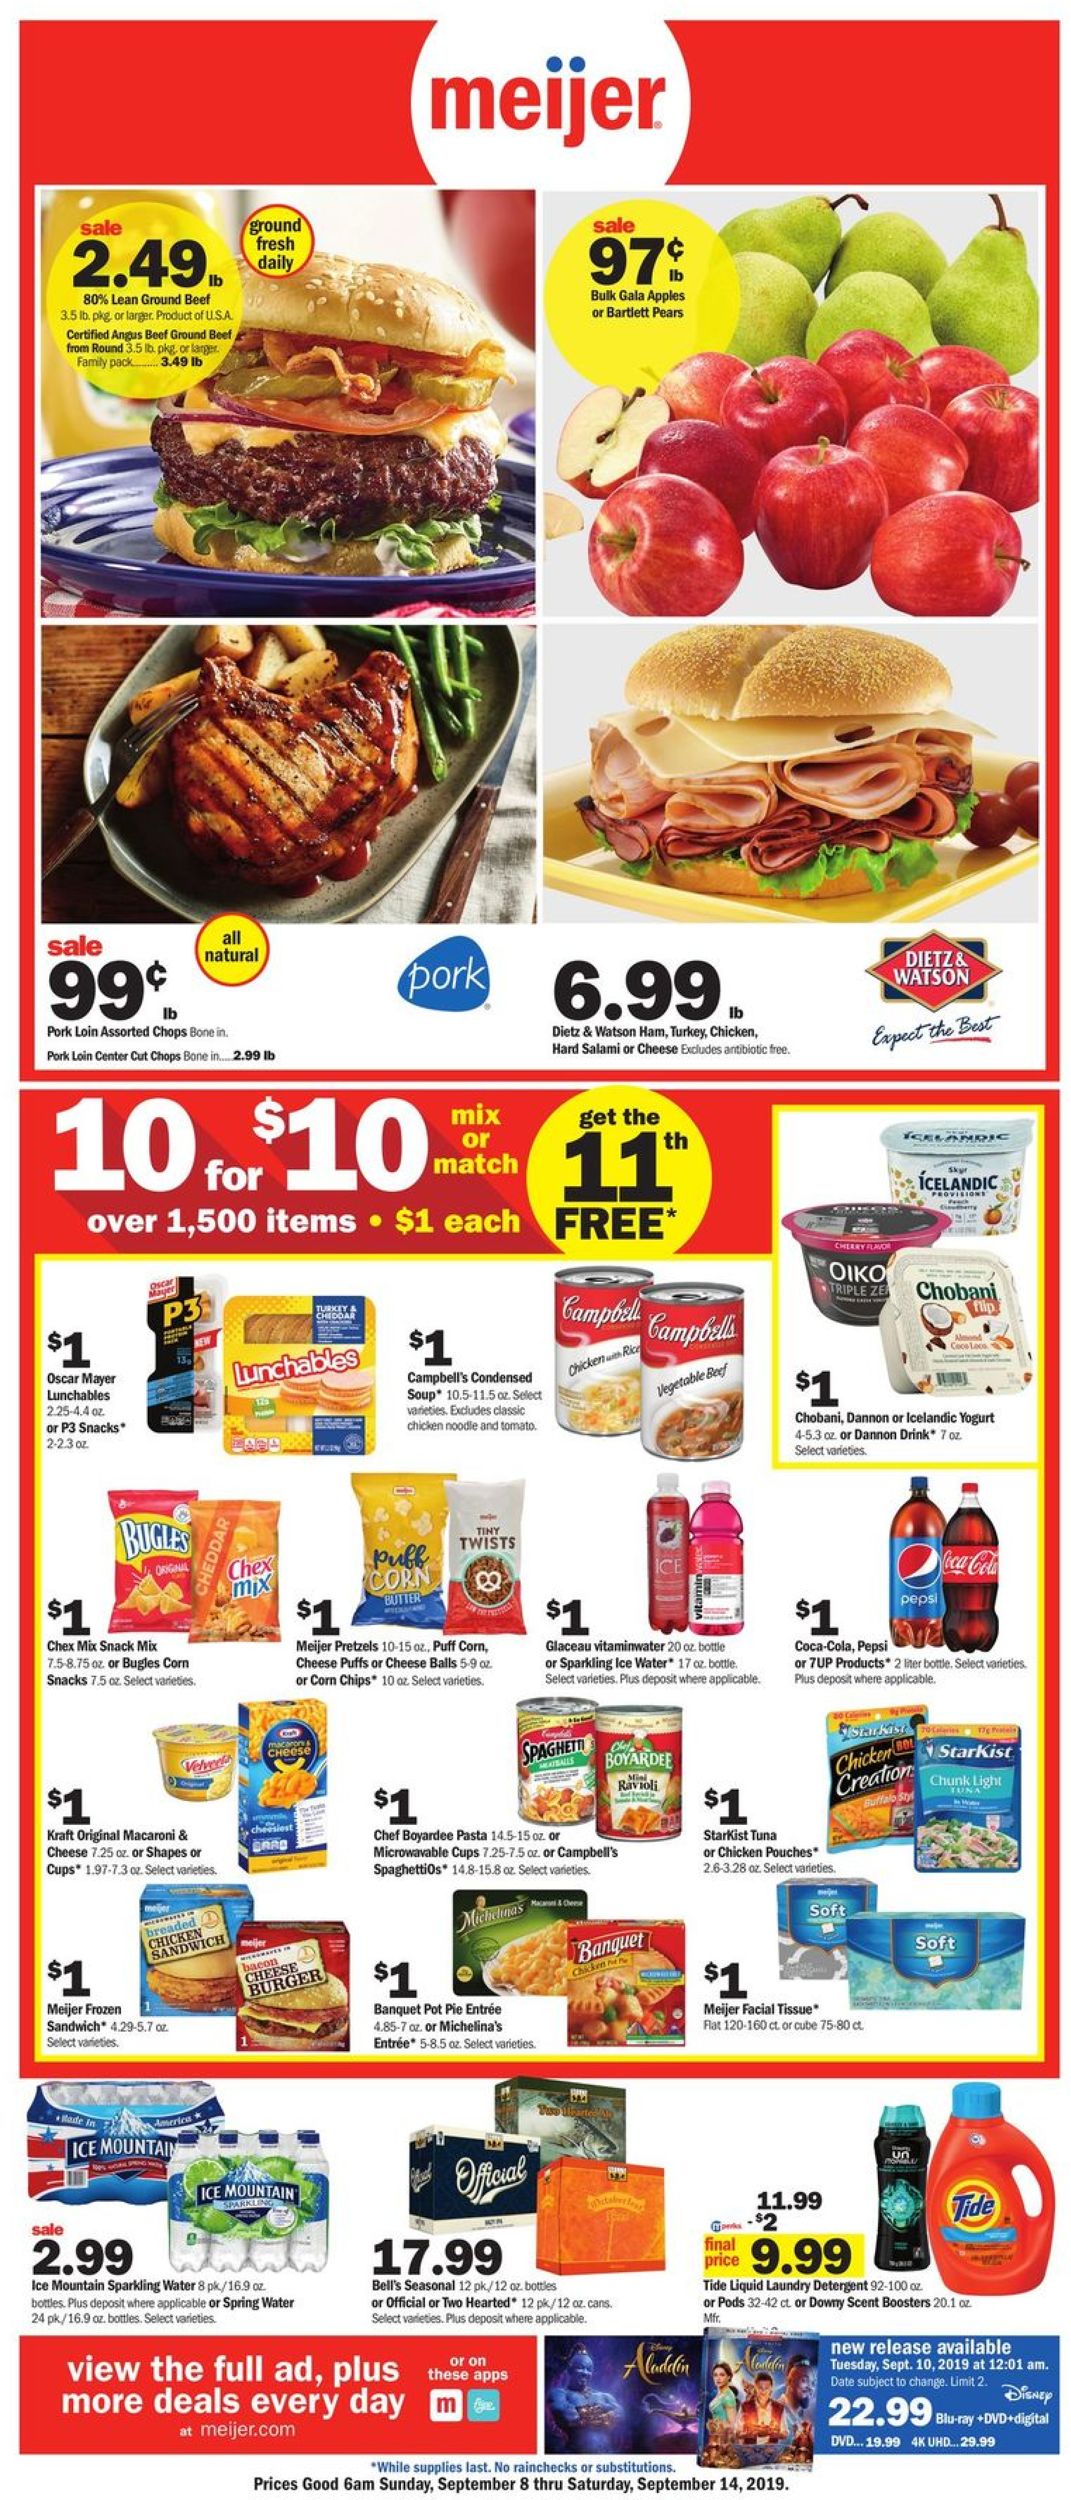 Meijer Current weekly ad 09/08 09/14/2019